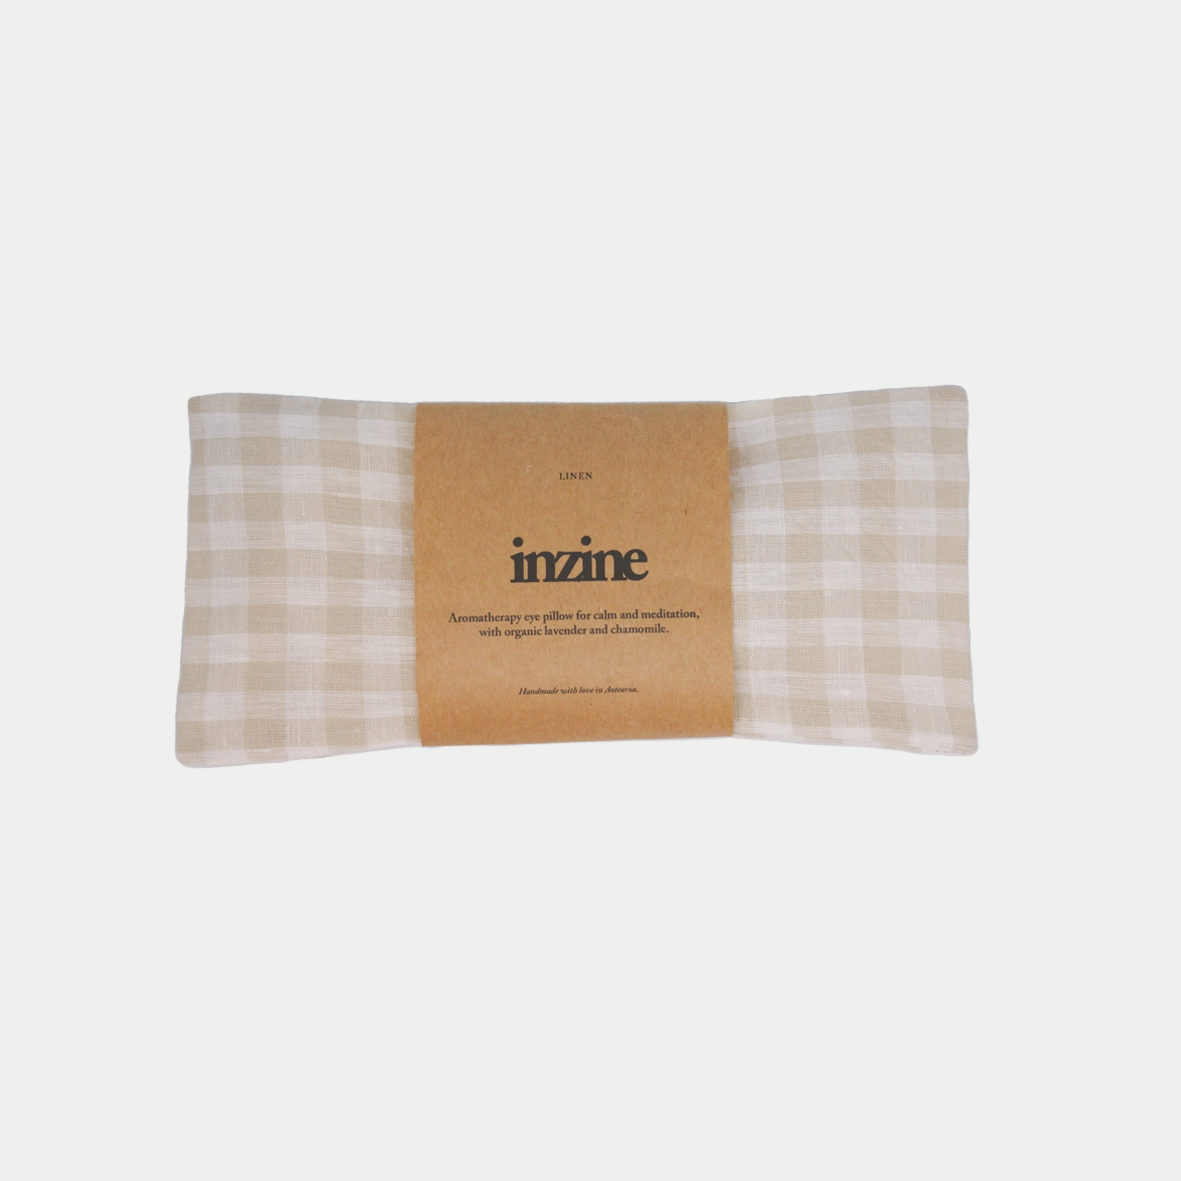 Handmade linen eye pillow in gingham alabaster, filled with organic chamomile and lavender and linseed.